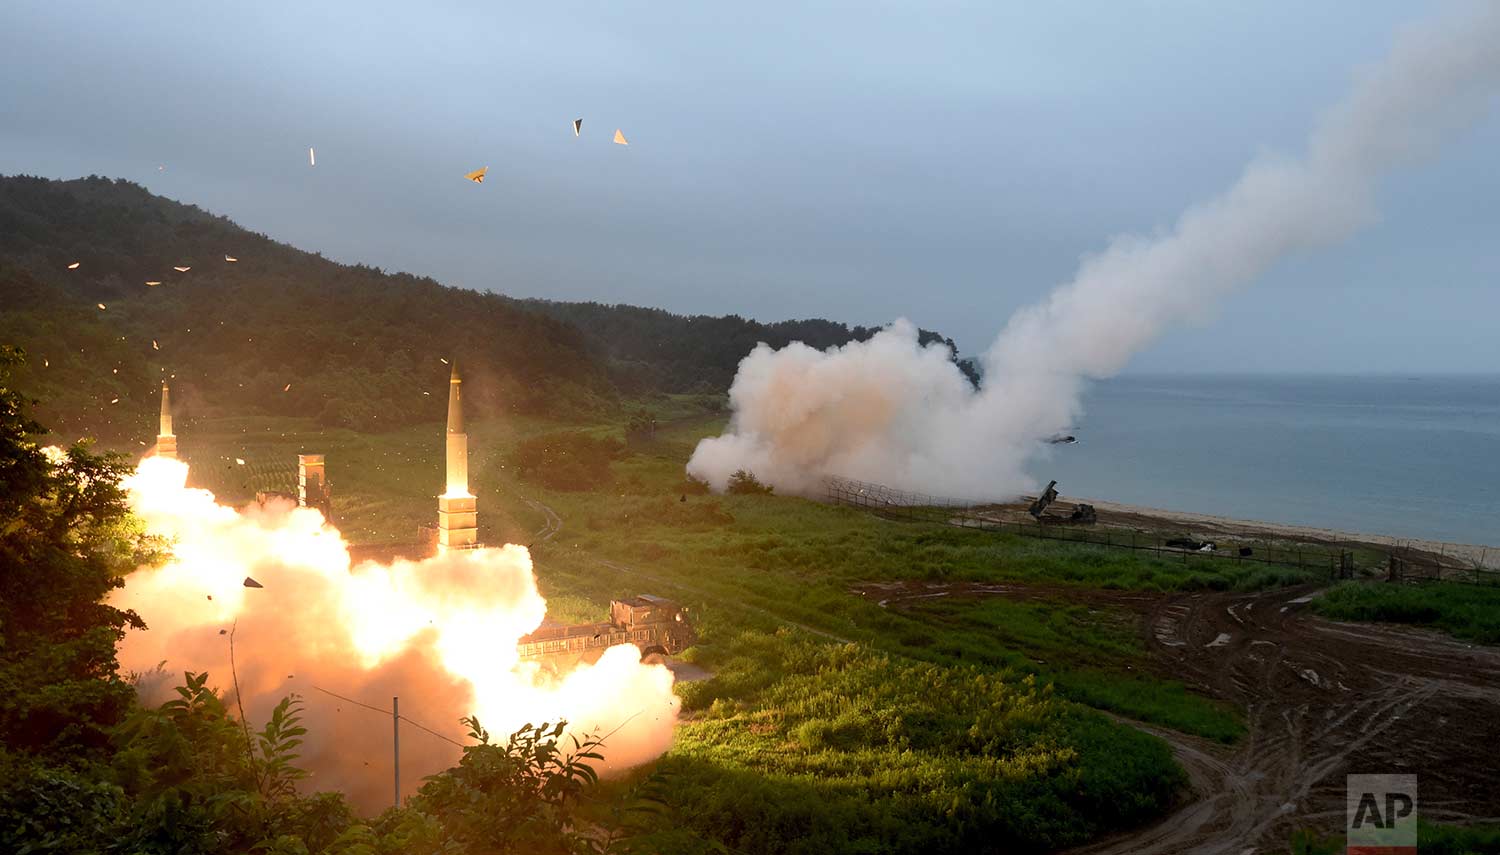  In this photo provided by South Korea Defense Ministry, South Korea's Hyunmoo II Missile system, left, and a U.S. Army Tactical Missile System, right, fire missiles during a combined military exercise between the two countries against North Korea at